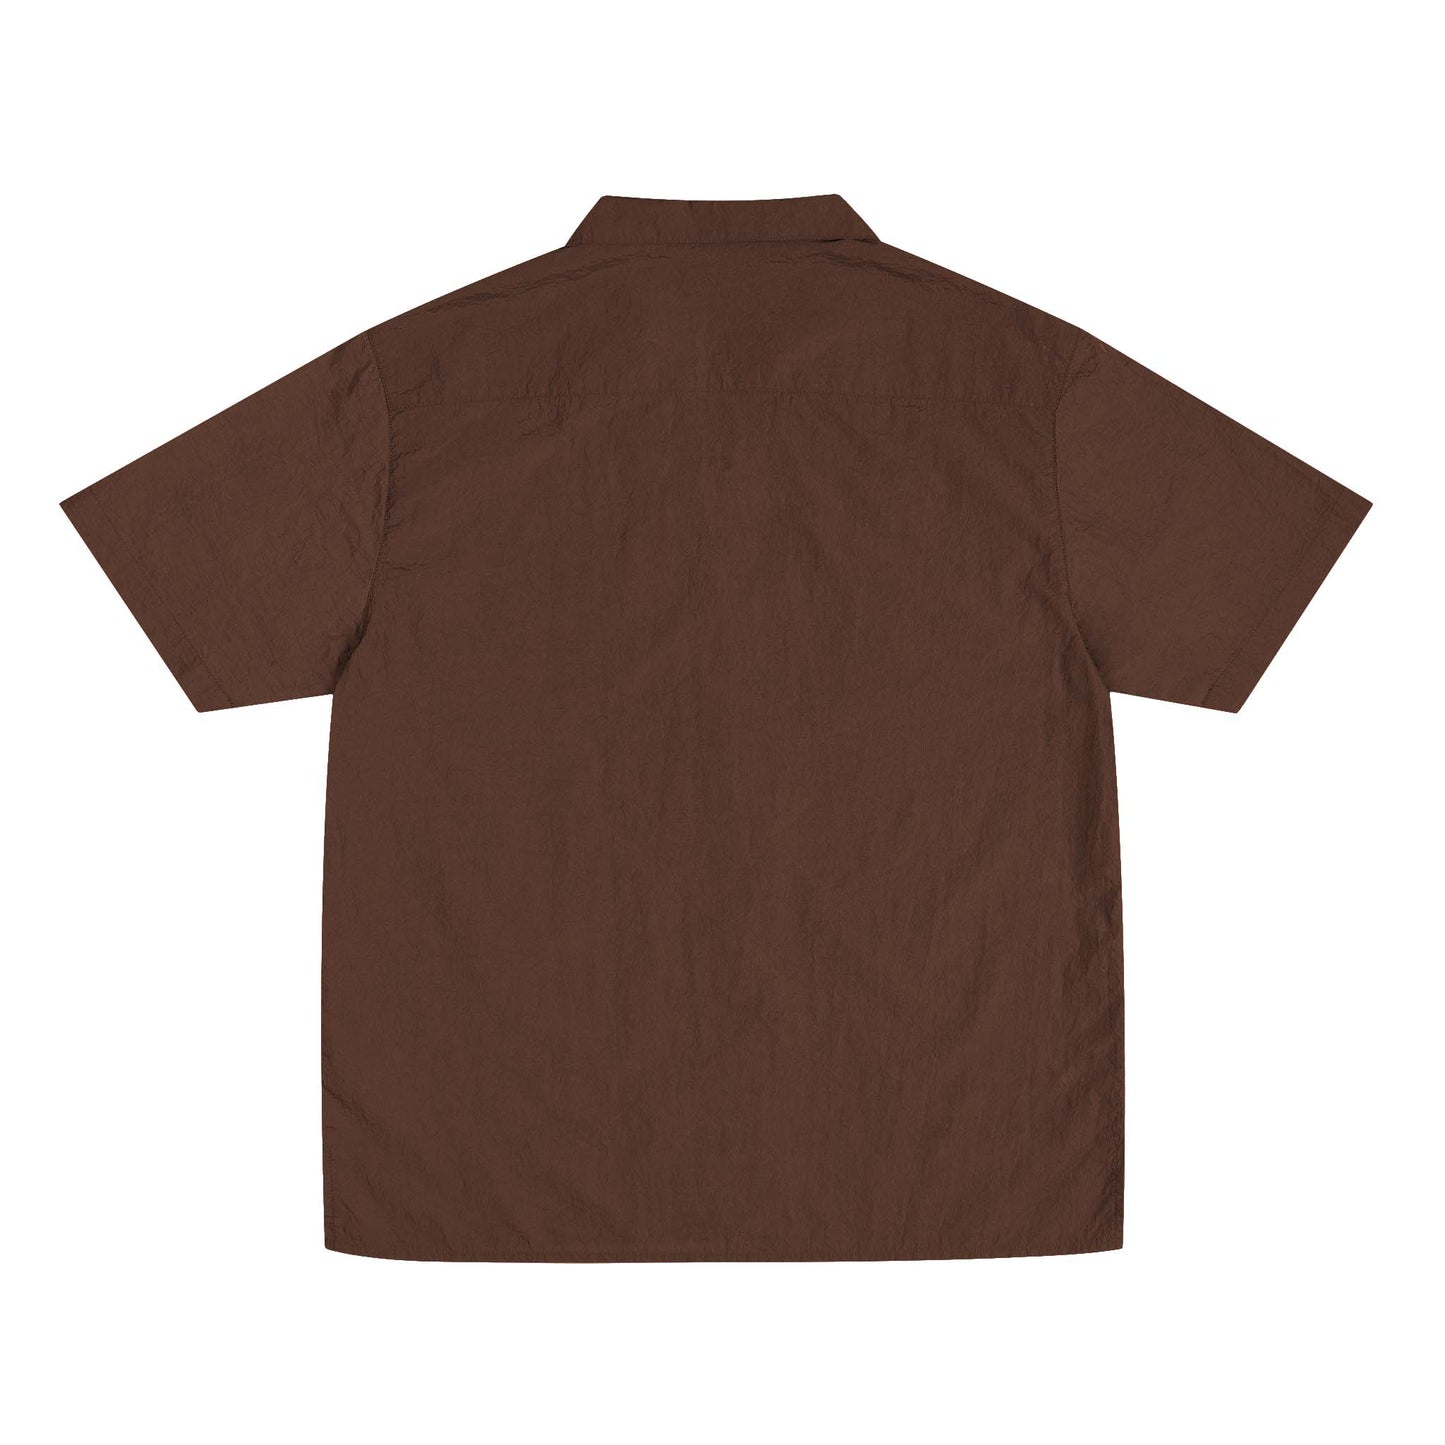 Load image into Gallery viewer, Crinkle Nylon Shirt - Brown
